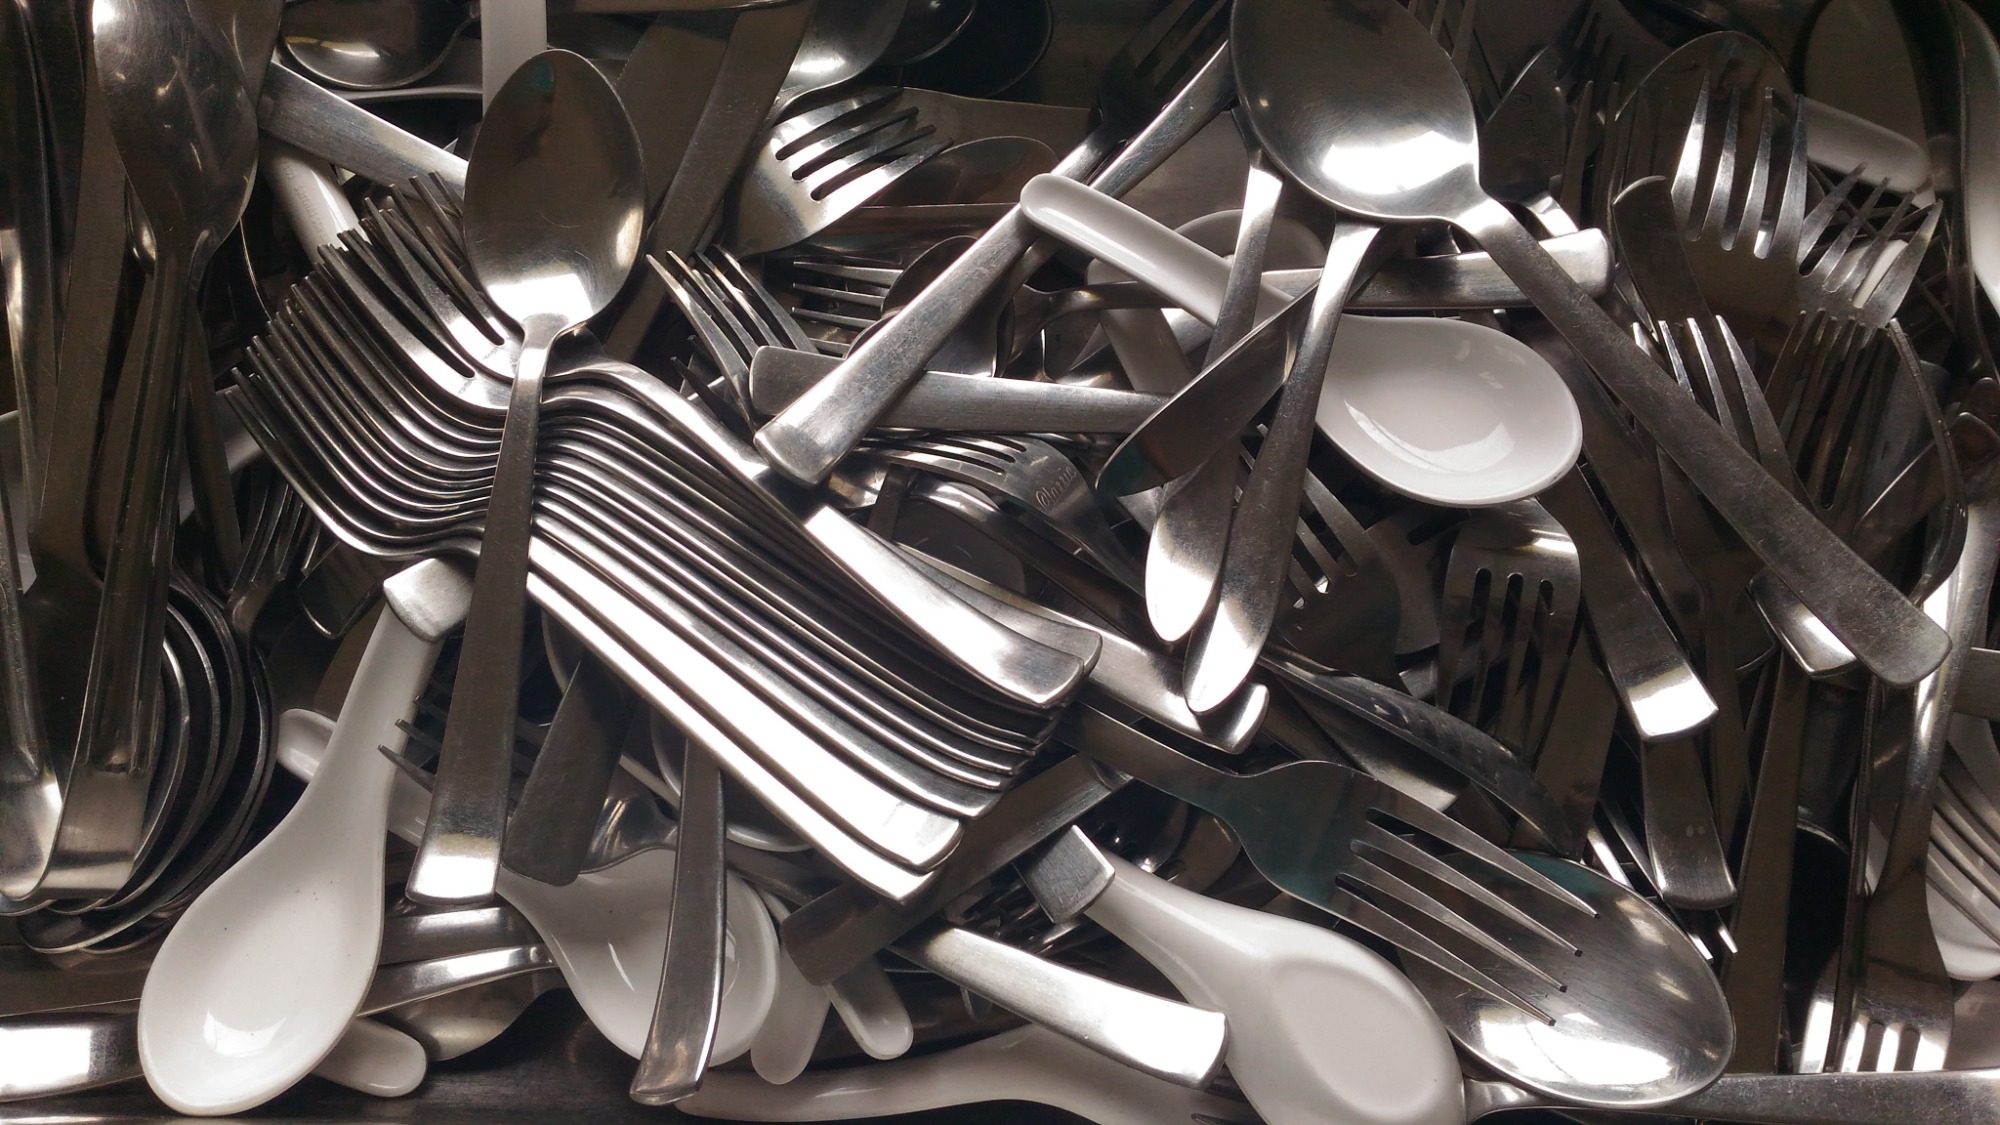 Is your stainless steel cutlery magnetic?